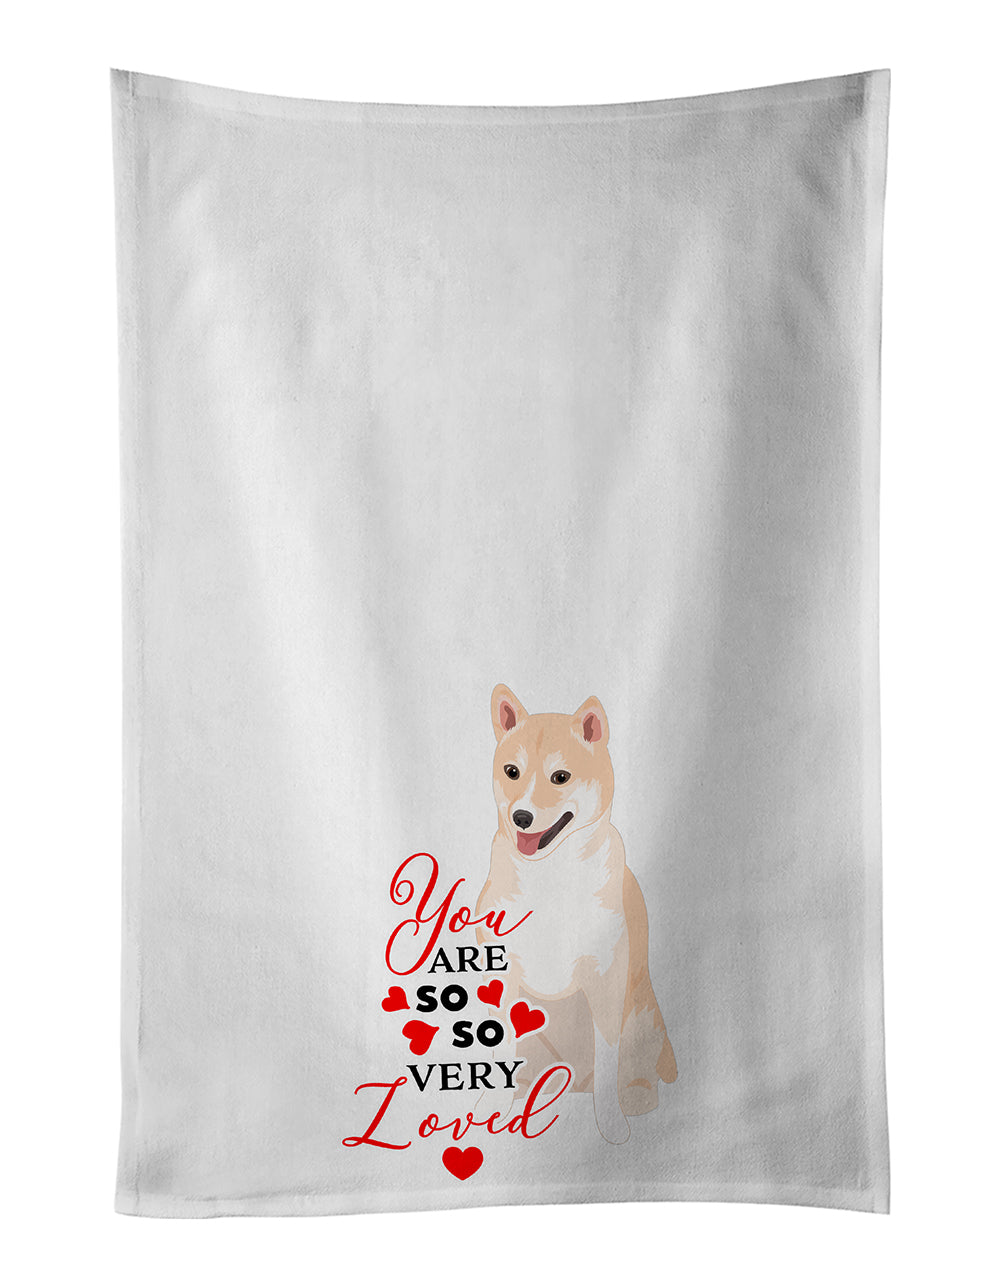 Buy this Shiba Inu Cream #2 so Loved White Kitchen Towel Set of 2